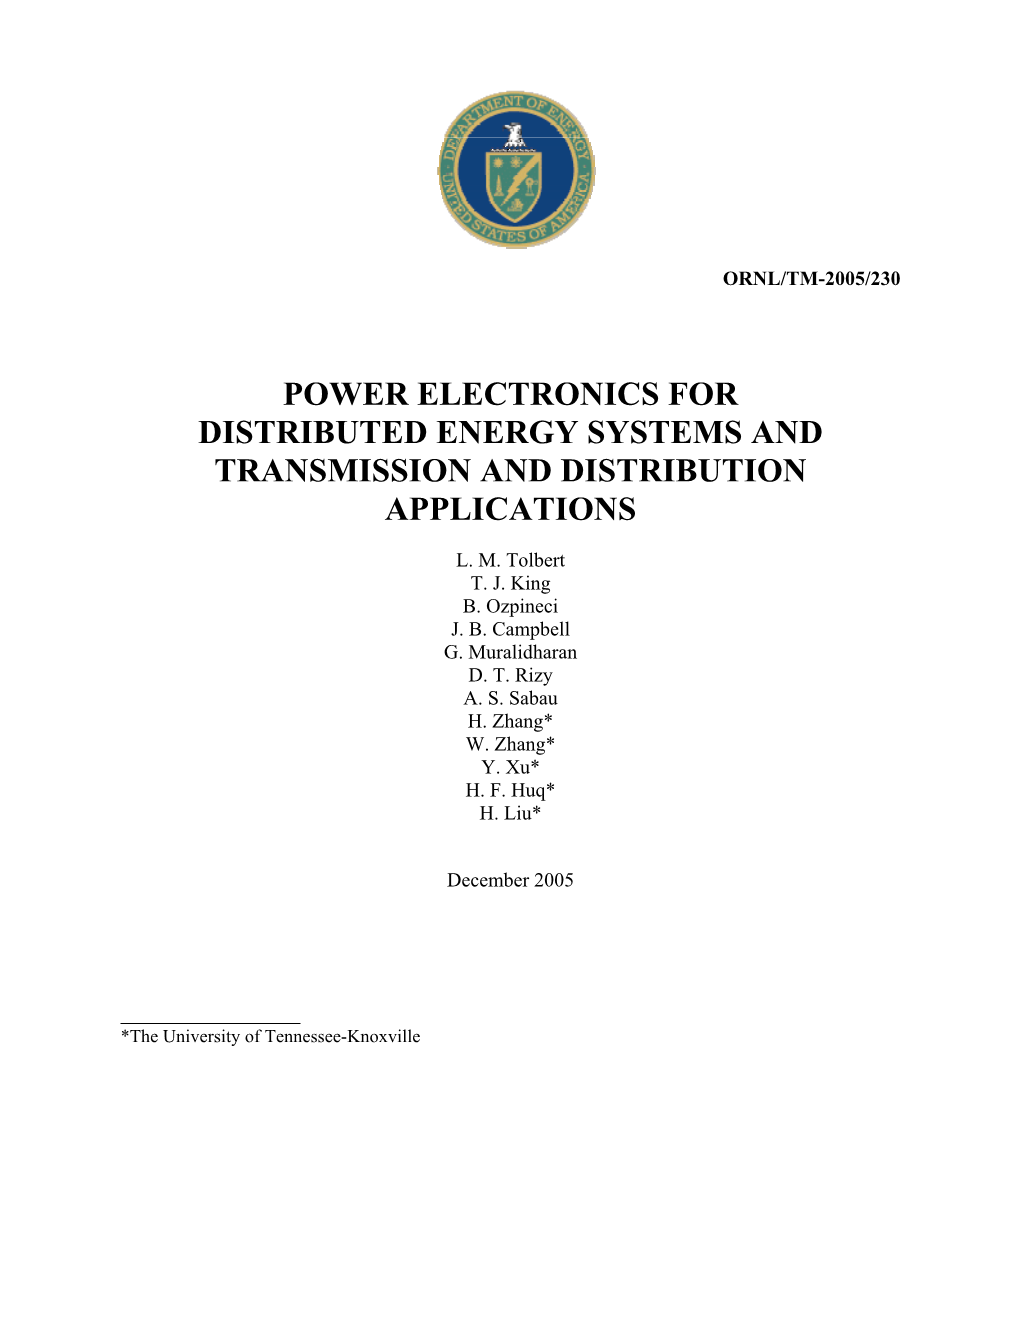 Power Electronics for Distributed Energy Systems and Transmission and Distribution Applications